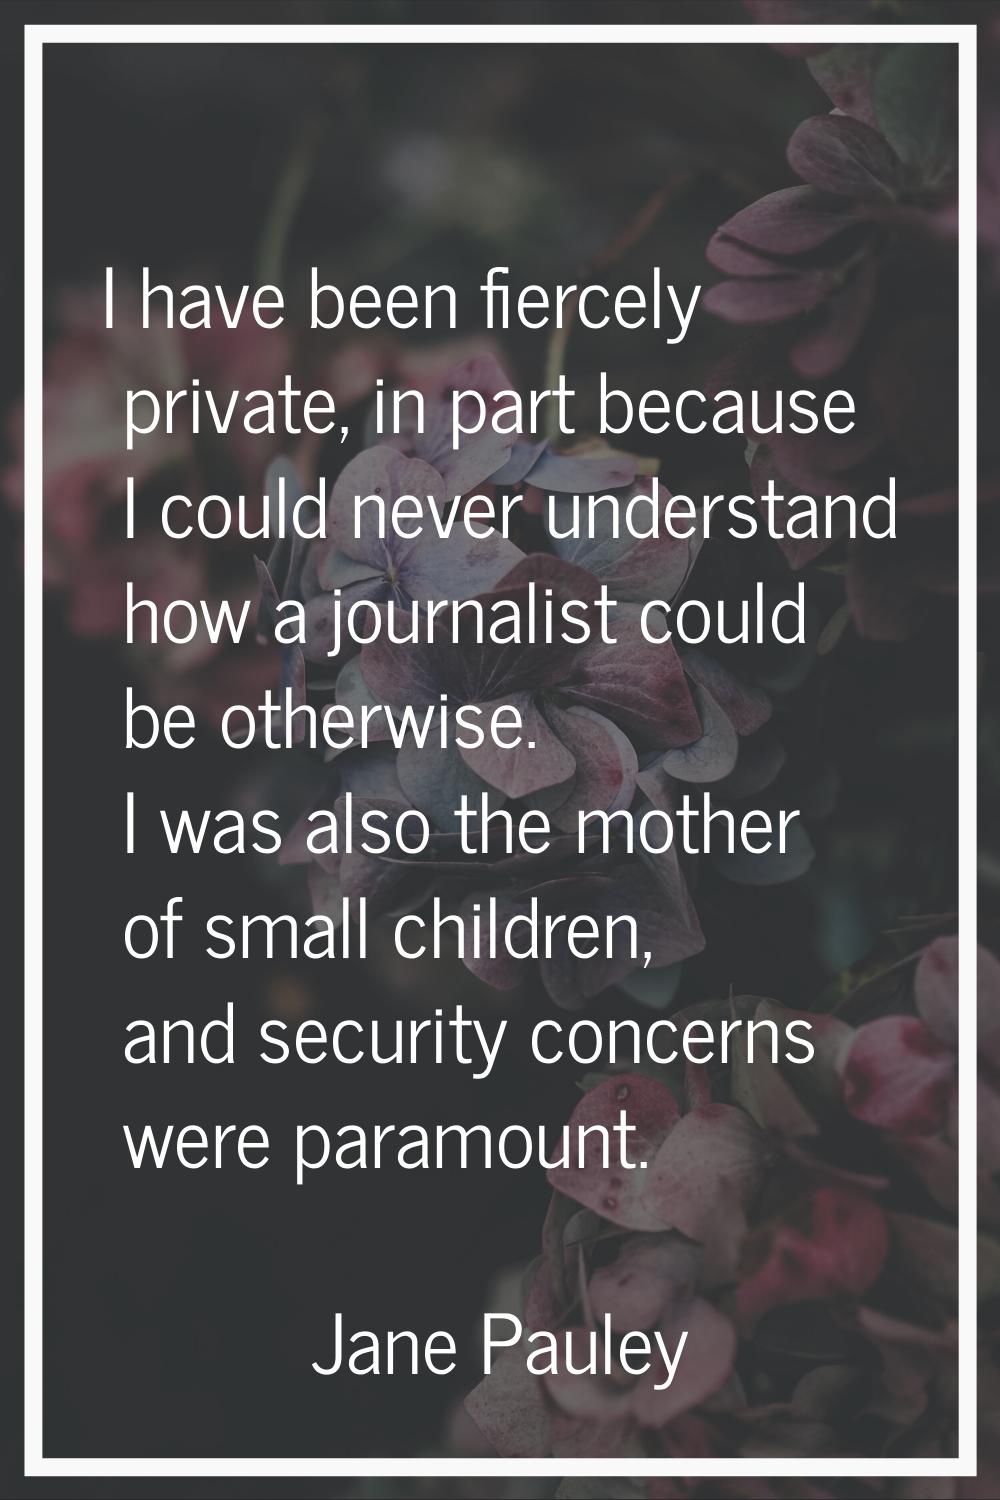 I have been fiercely private, in part because I could never understand how a journalist could be ot